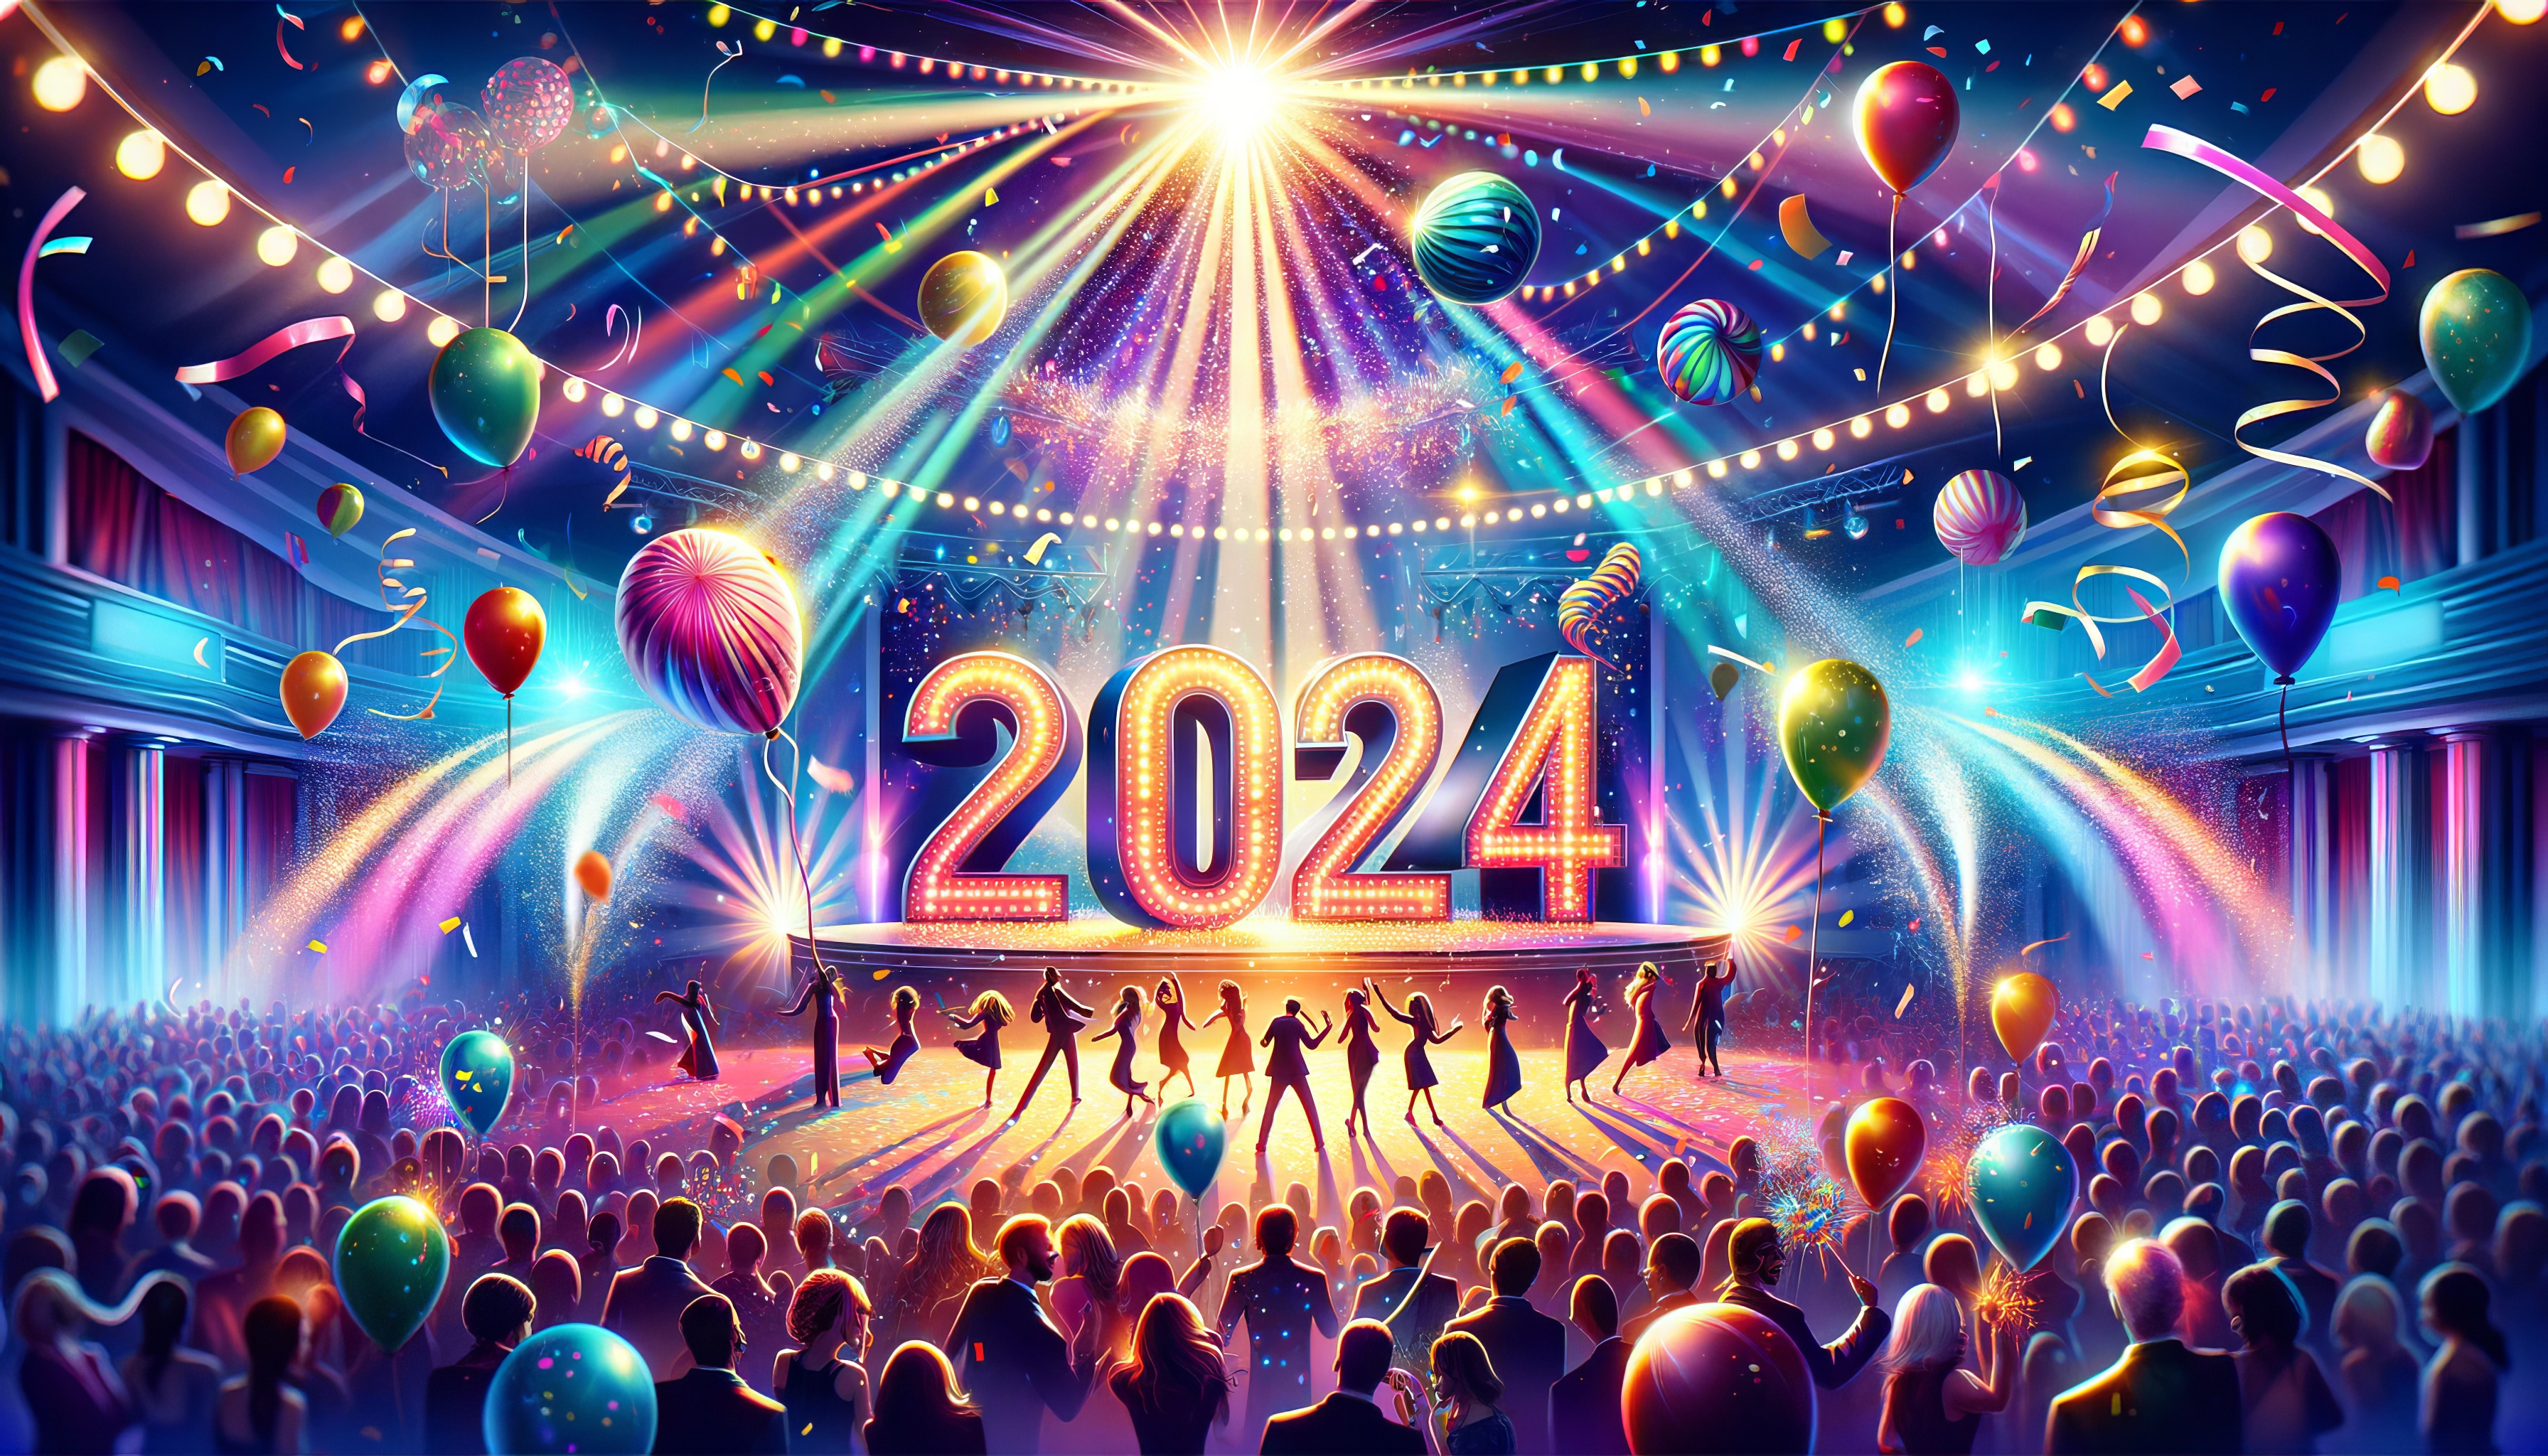 HD wallpaper of a vibrant New Year 2024 celebration with sparkling lights, balloons, and a festive crowd.